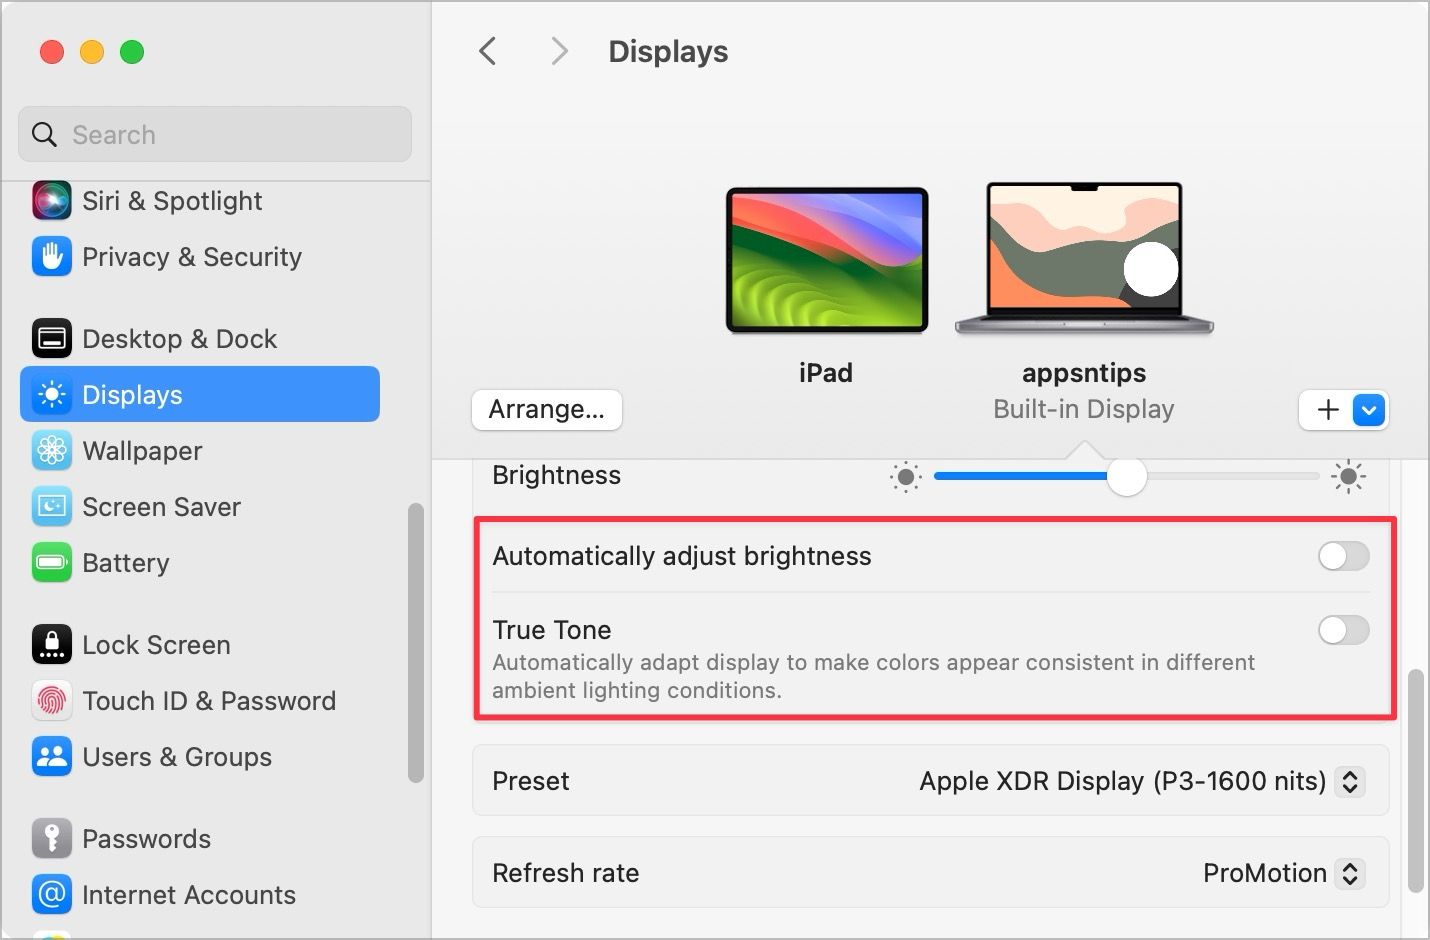 Turning of auto brightness and true tone in macOS